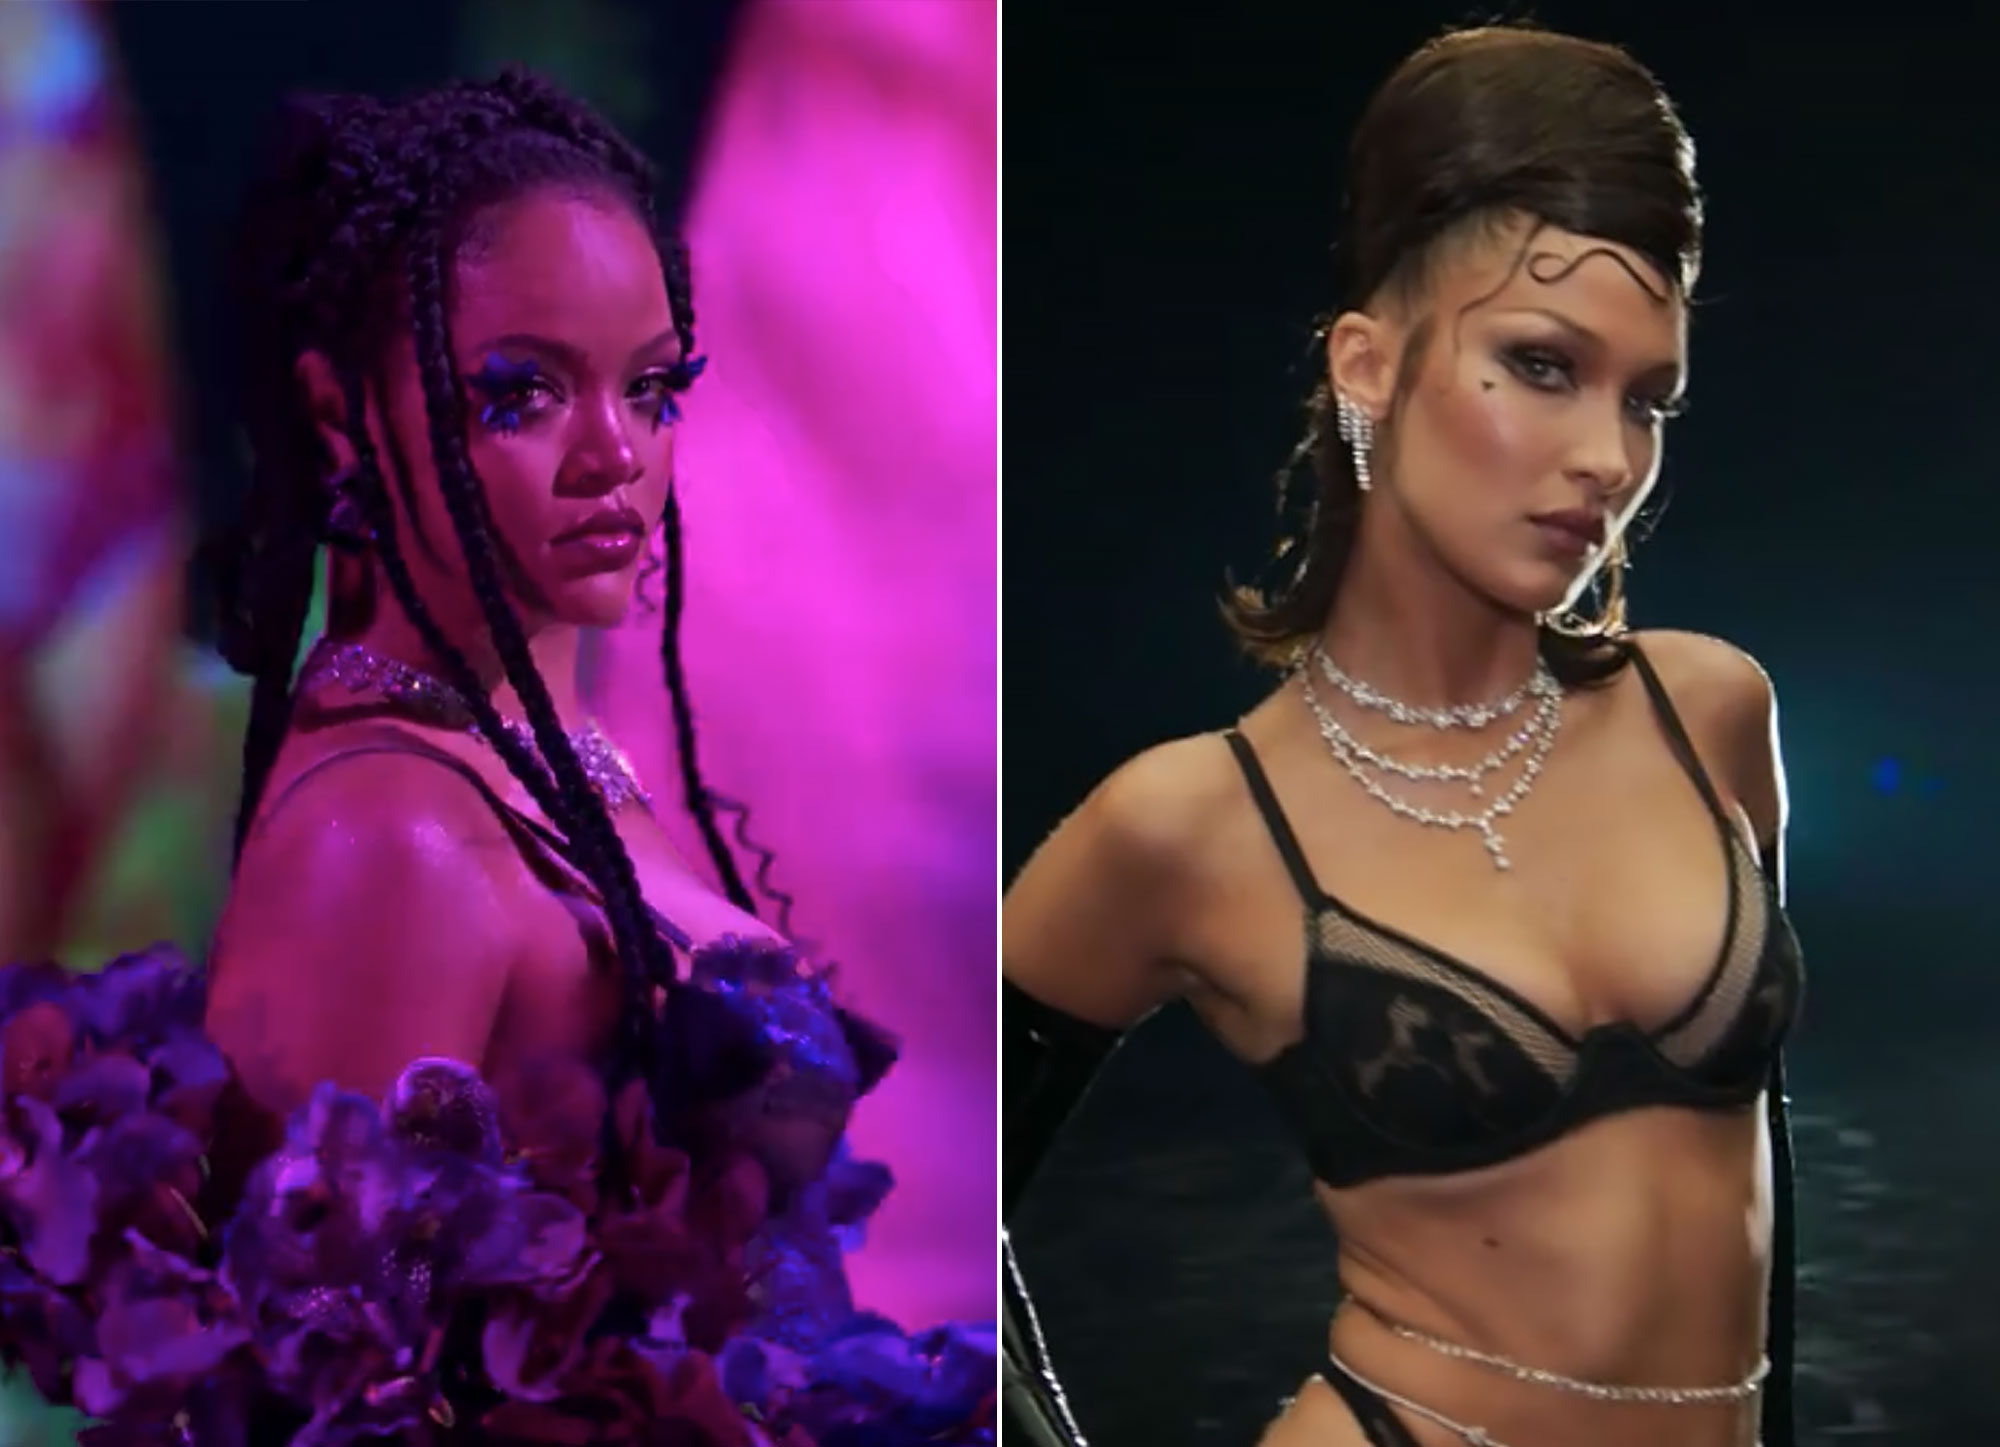 The Best Looks From Rihanna's Savage X Fenty Fashion Show